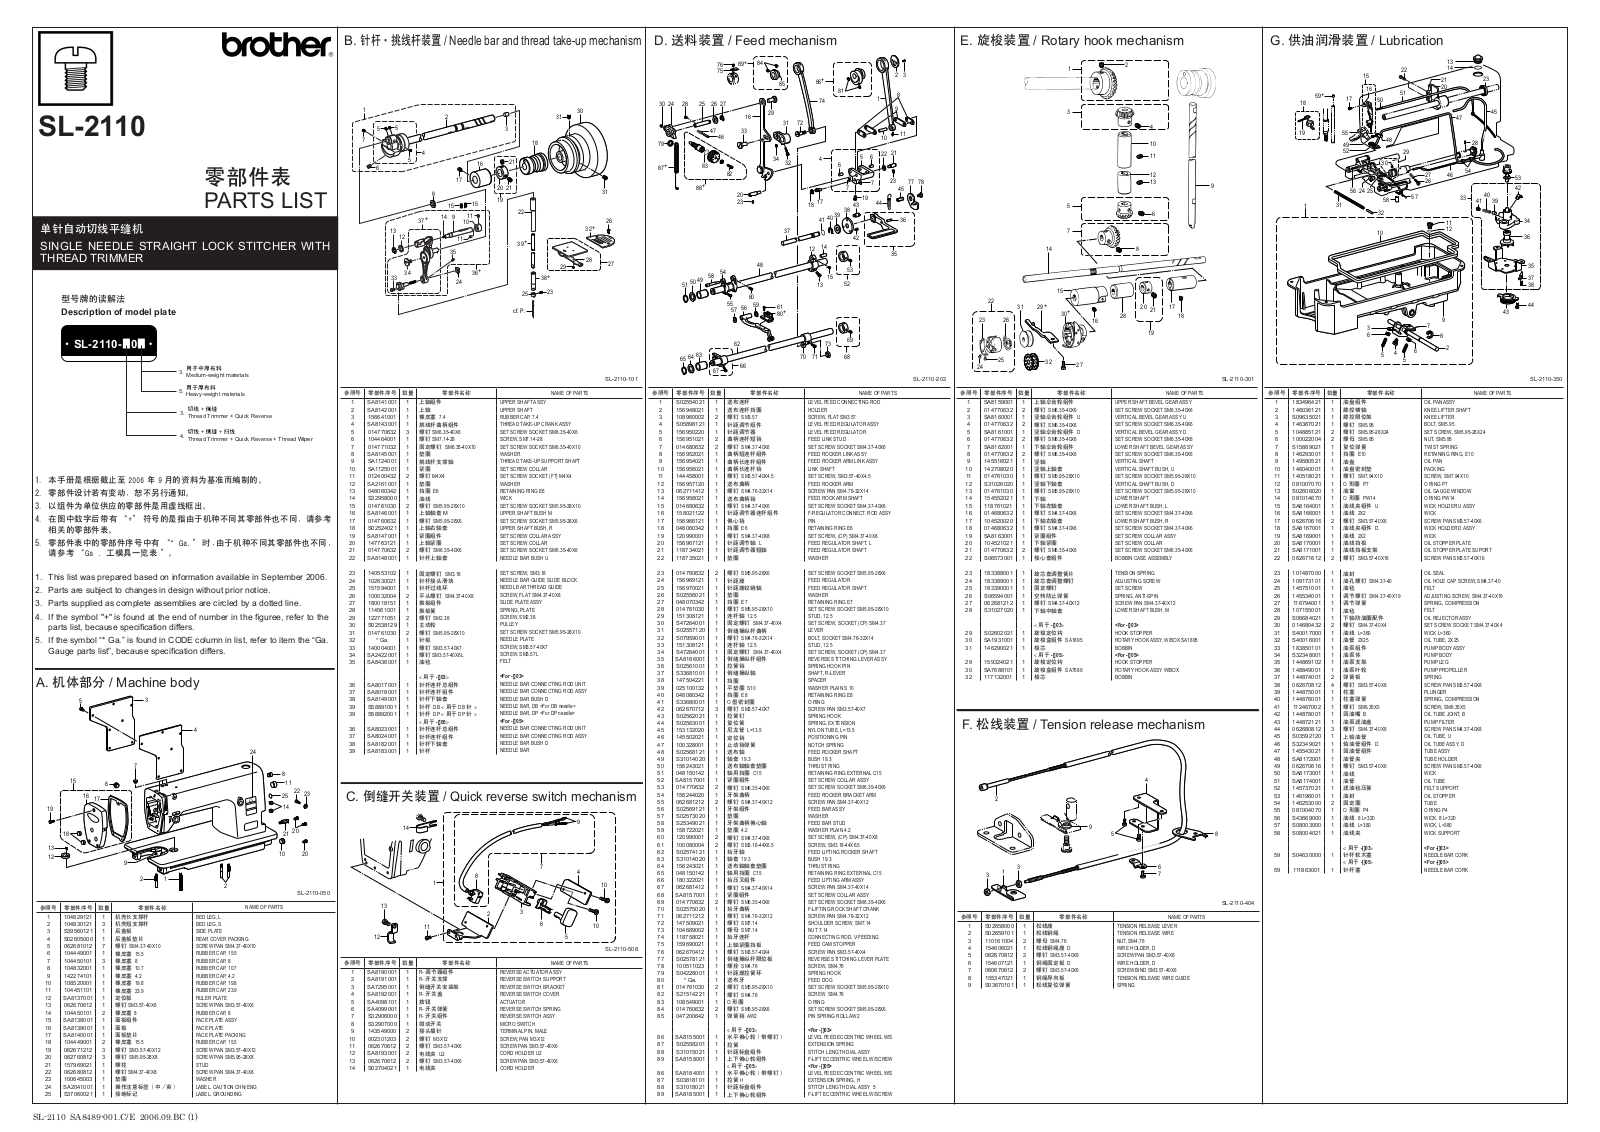 Brother SL-2110 Parts List